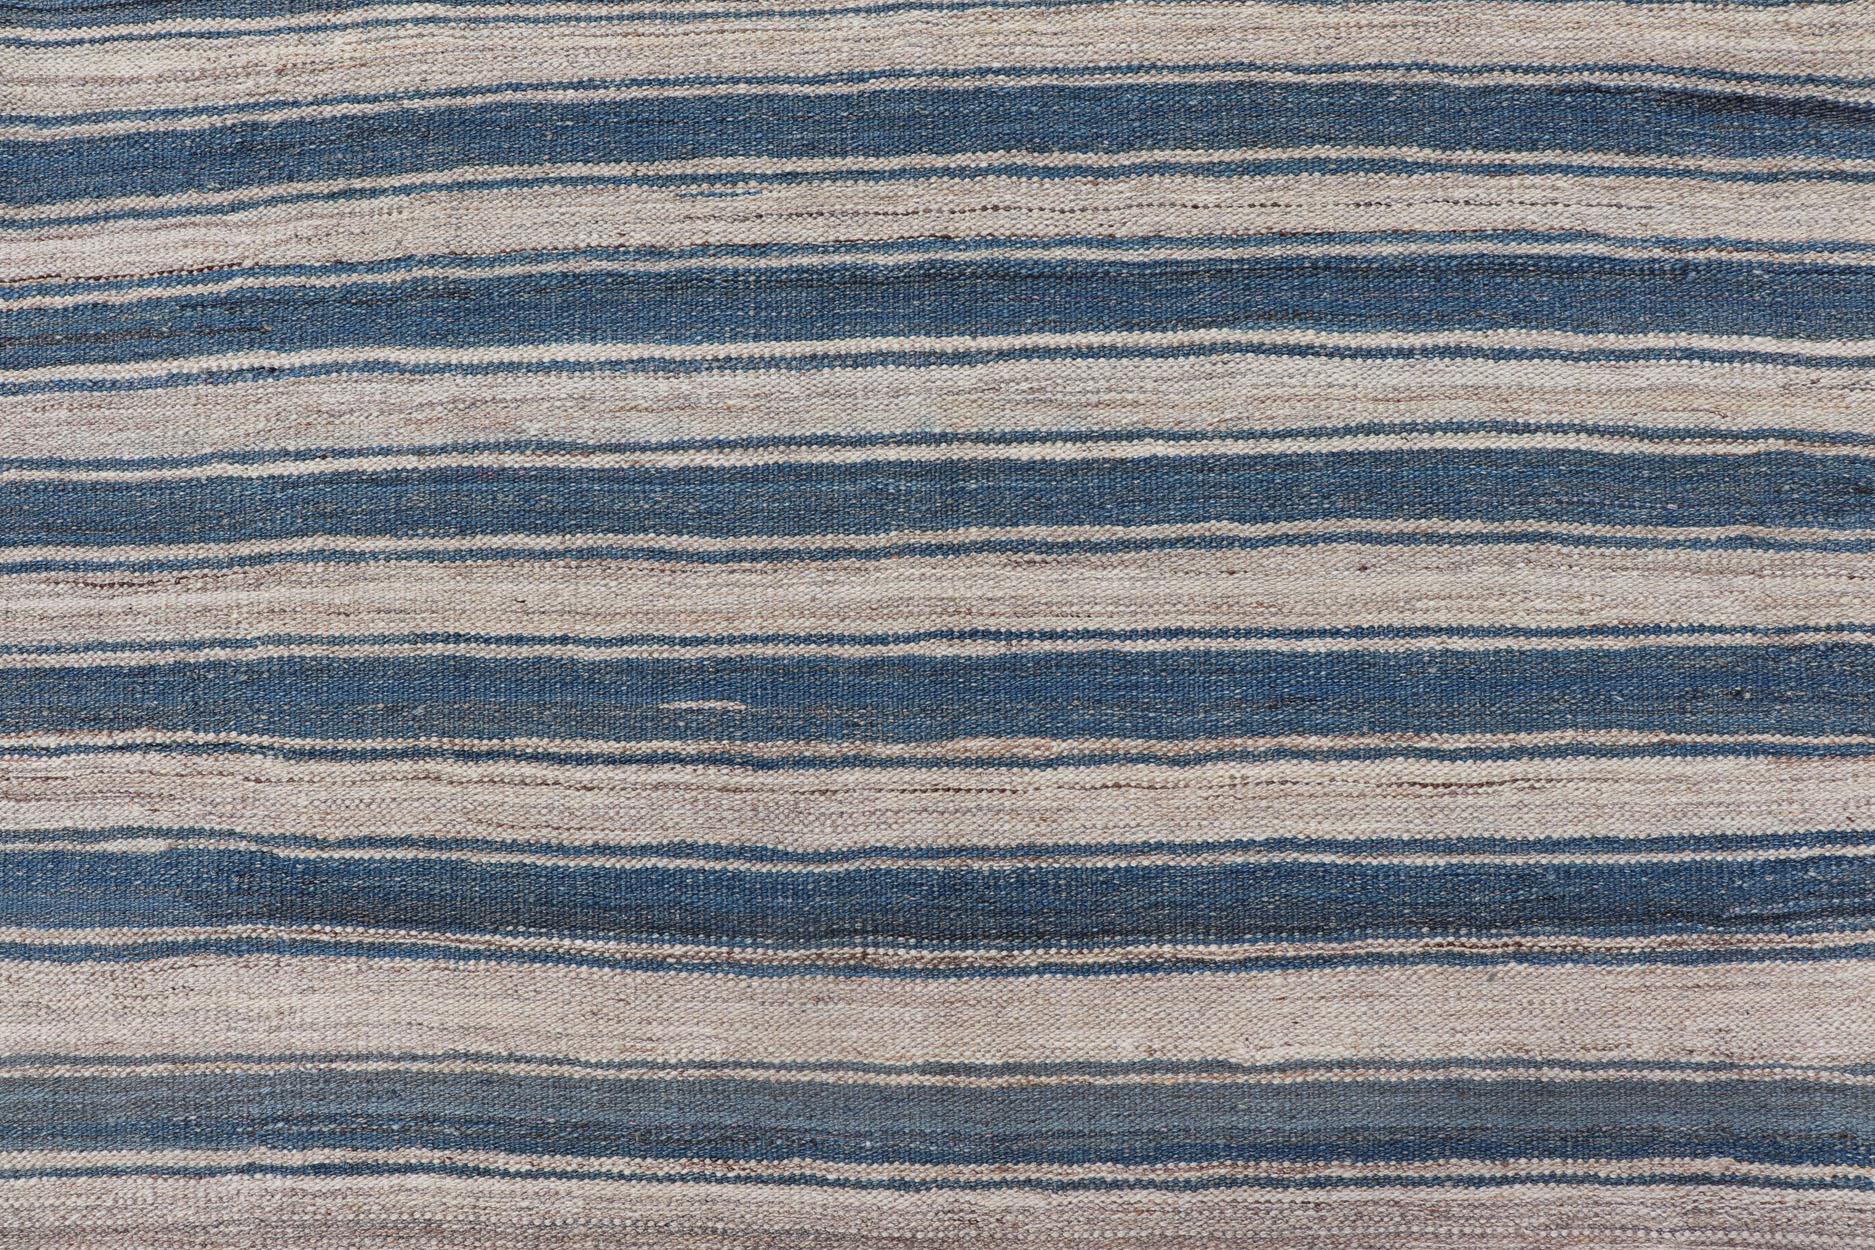 Flat-Weave Modern Kilim Rug with Stripes in Shades of Blue, and Cream For Sale 2